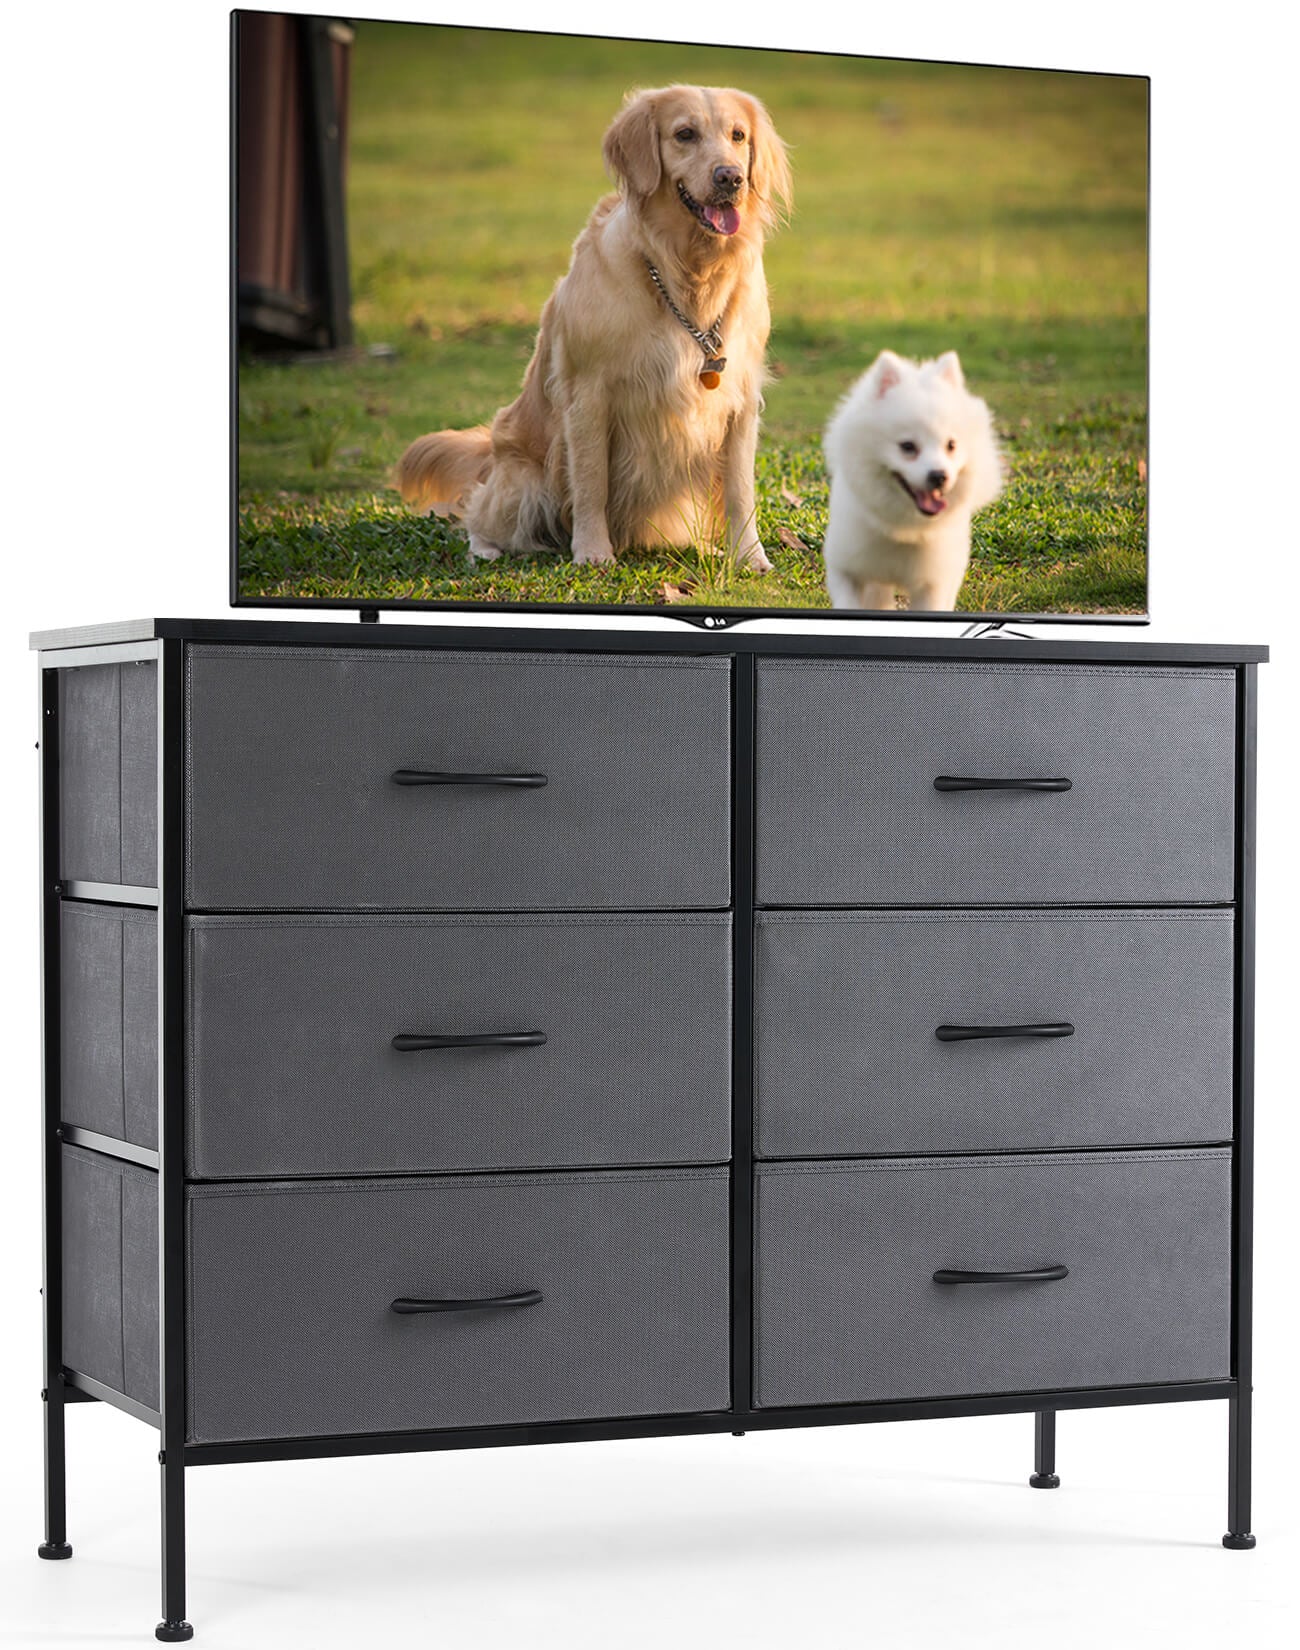 Dresser TV Stand, Console Table with 6 Wide Drawers, Entertainment Center for 55" TV Storage Fabric Dresser Drawer